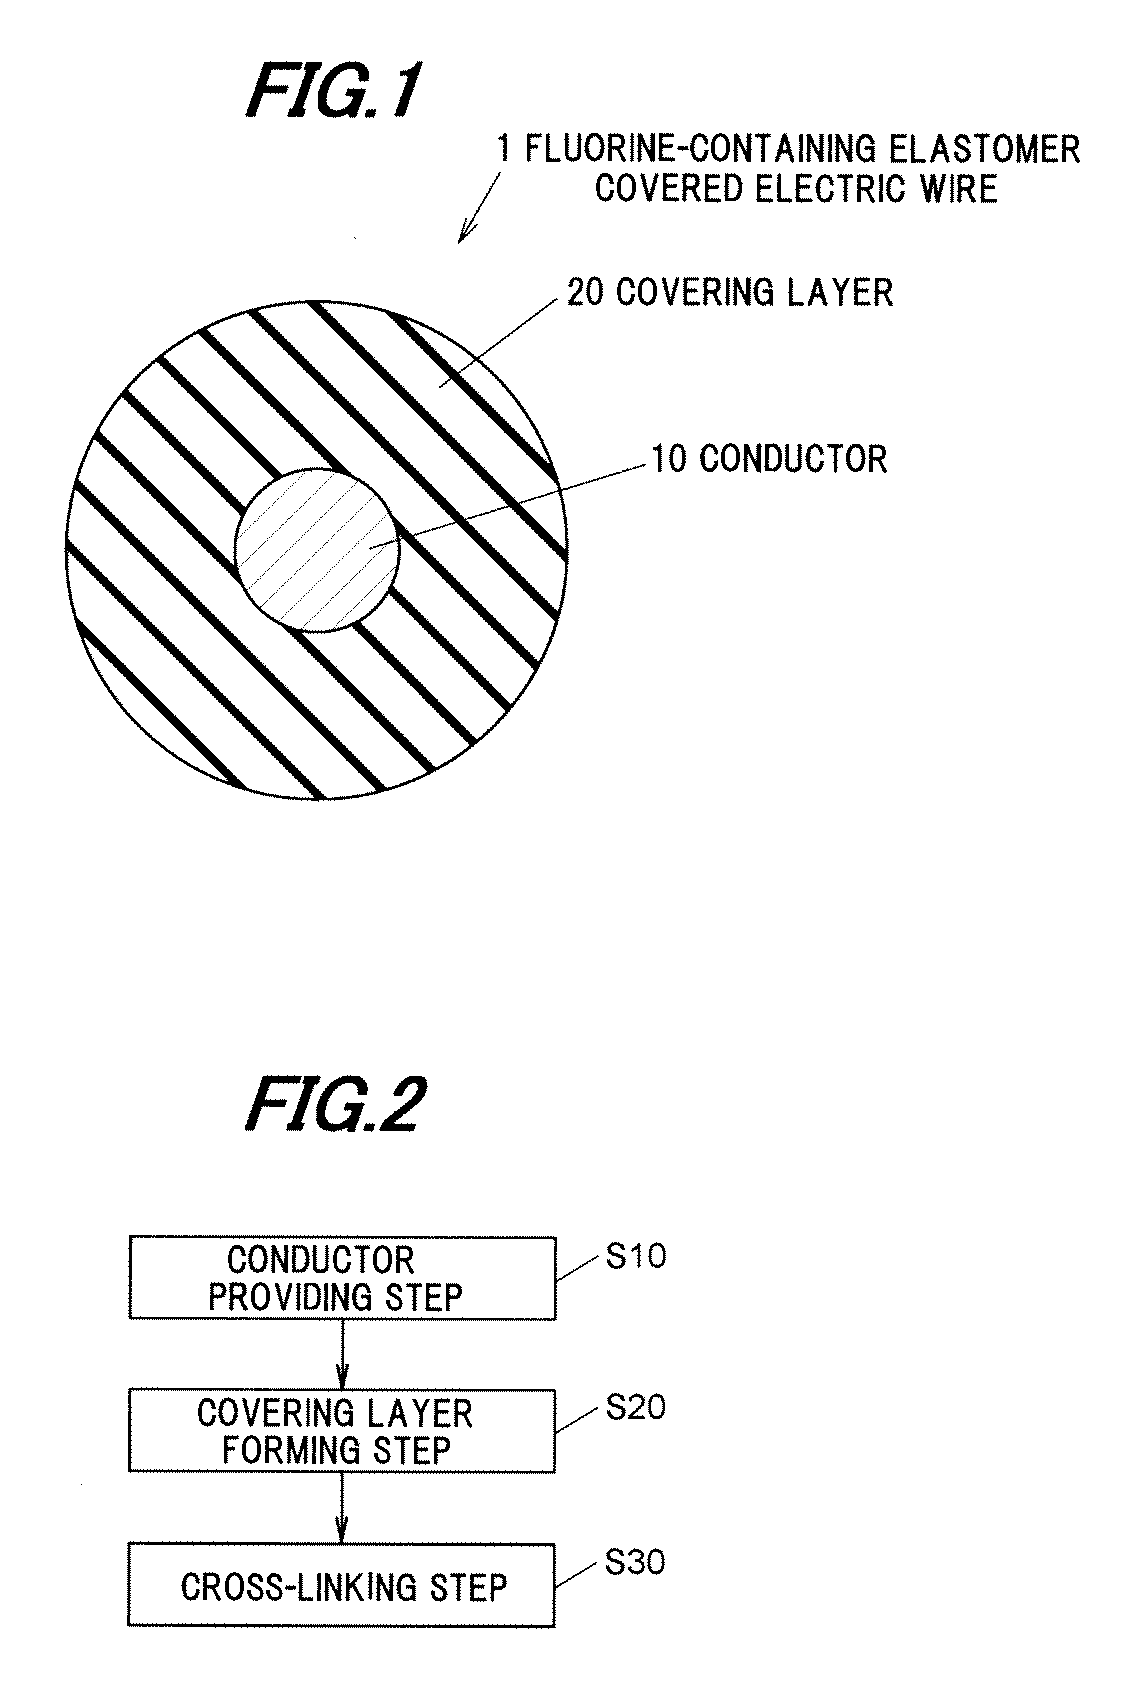 Fluorine-containing elastomer covered electric wire, and method for making same